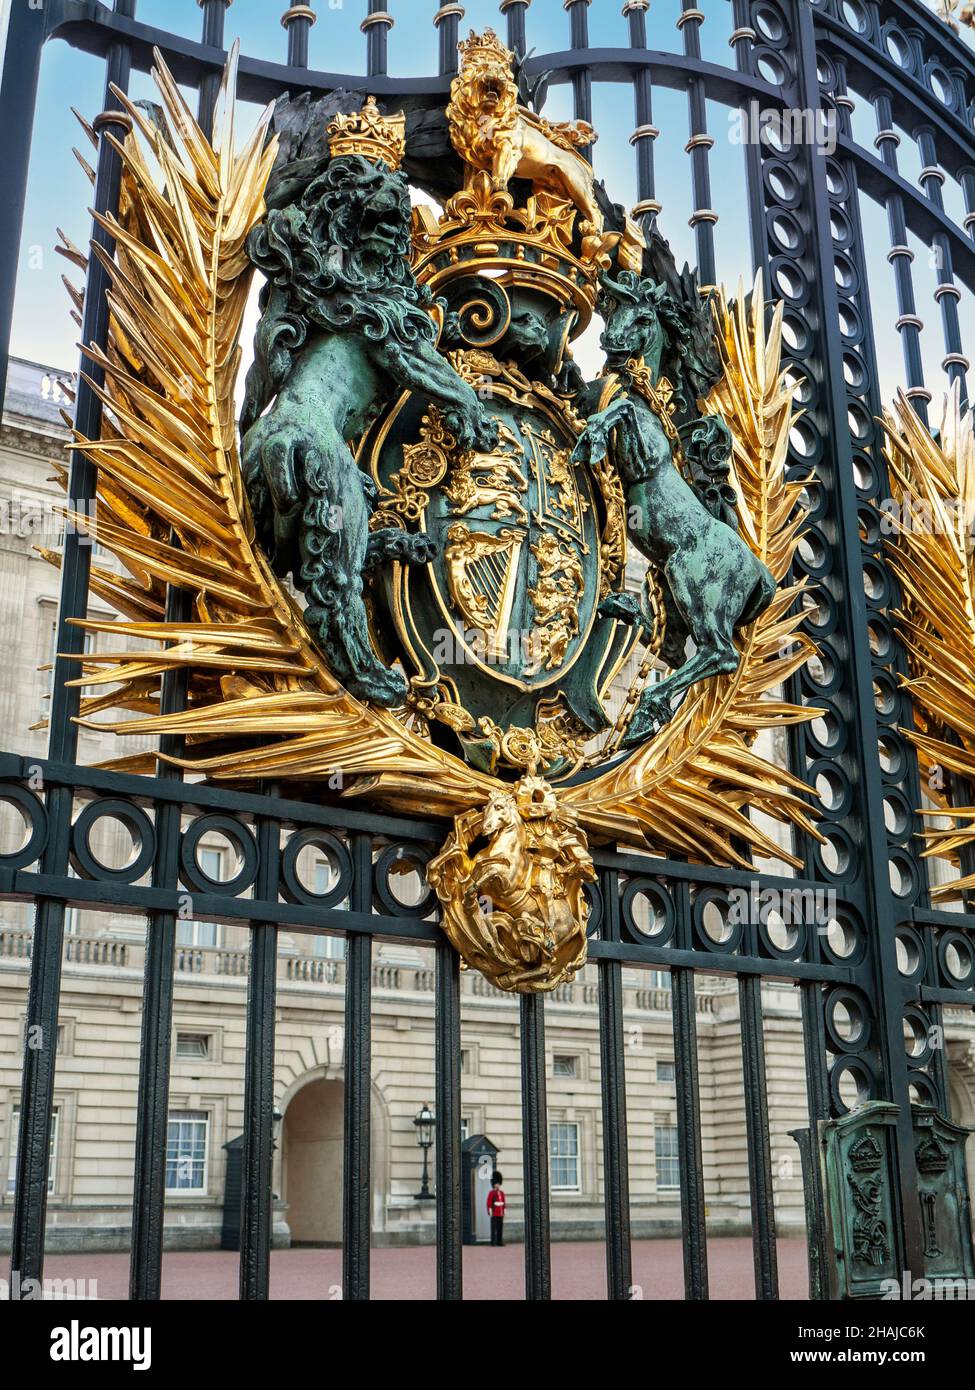 Royal crest on the entrance gates of Buckingham Palace with traditional guard in red tunic and busby in background, London, England Stock Photo